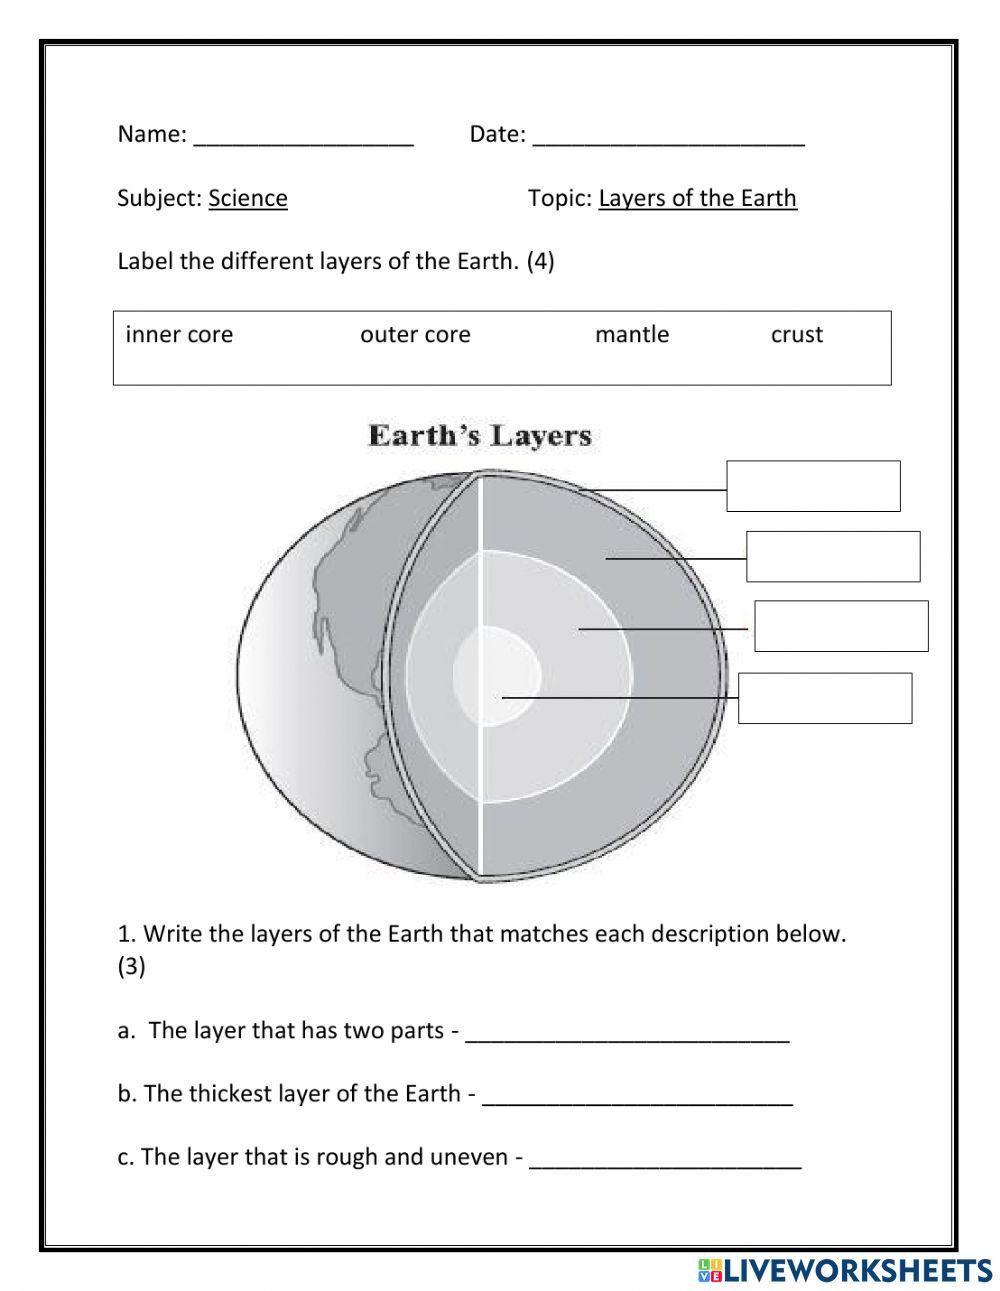 Layers of the earth